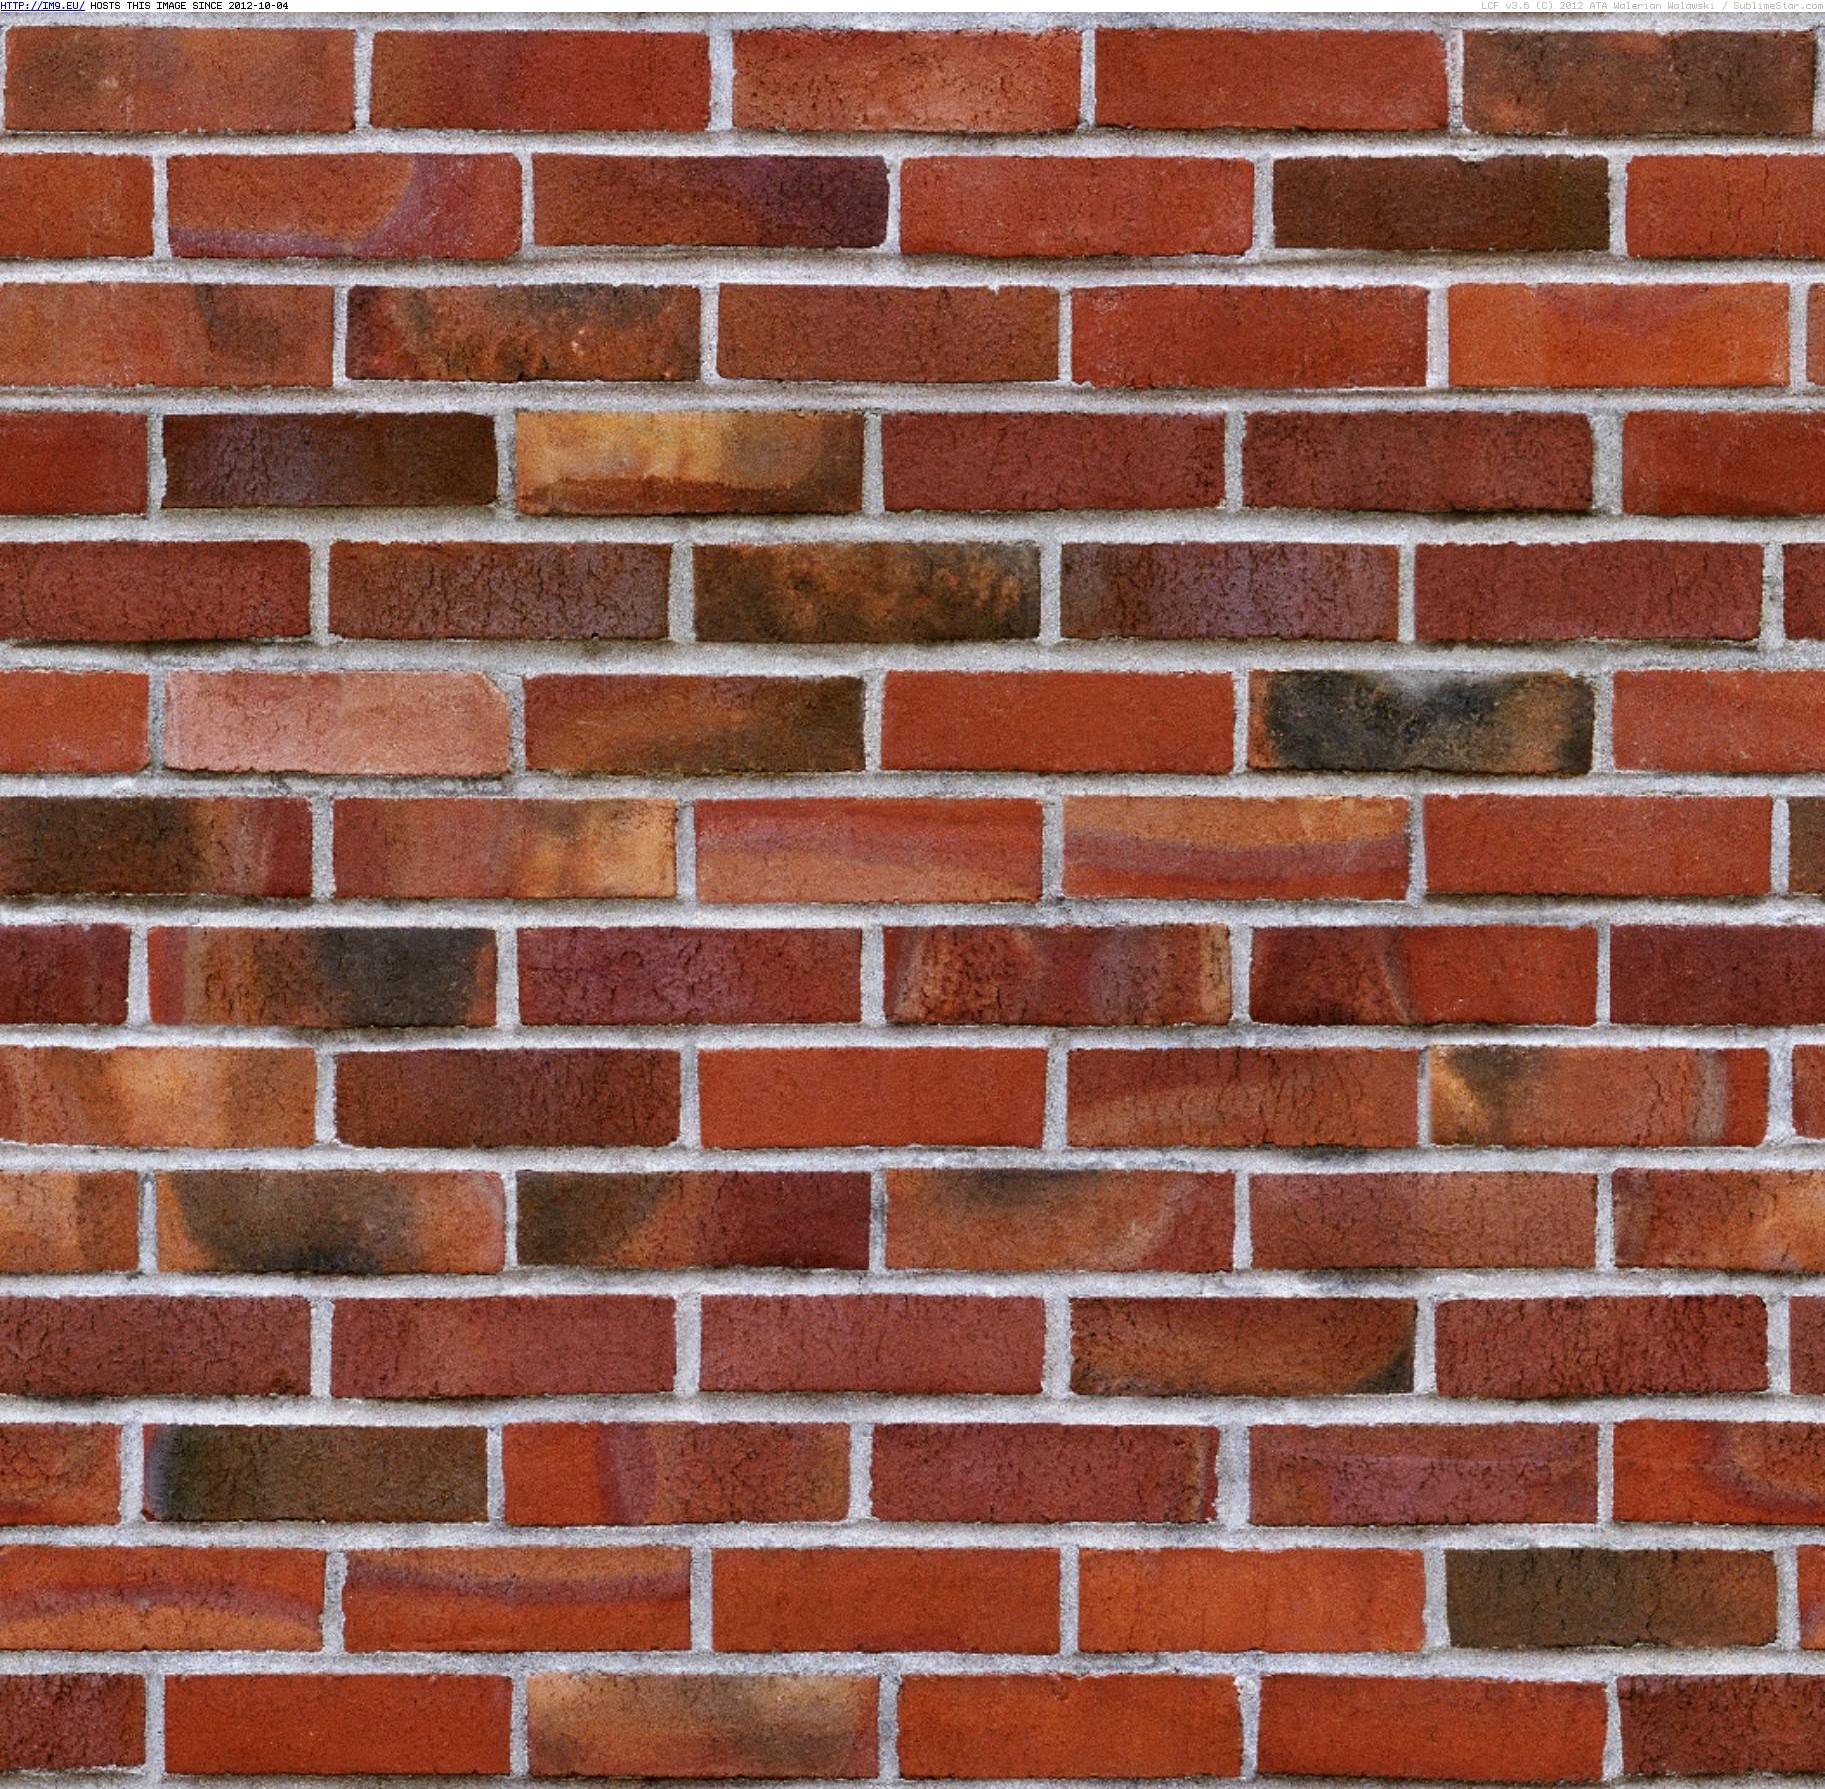 Brick wall texture 8 (in Brick walls textures and wallpapers)